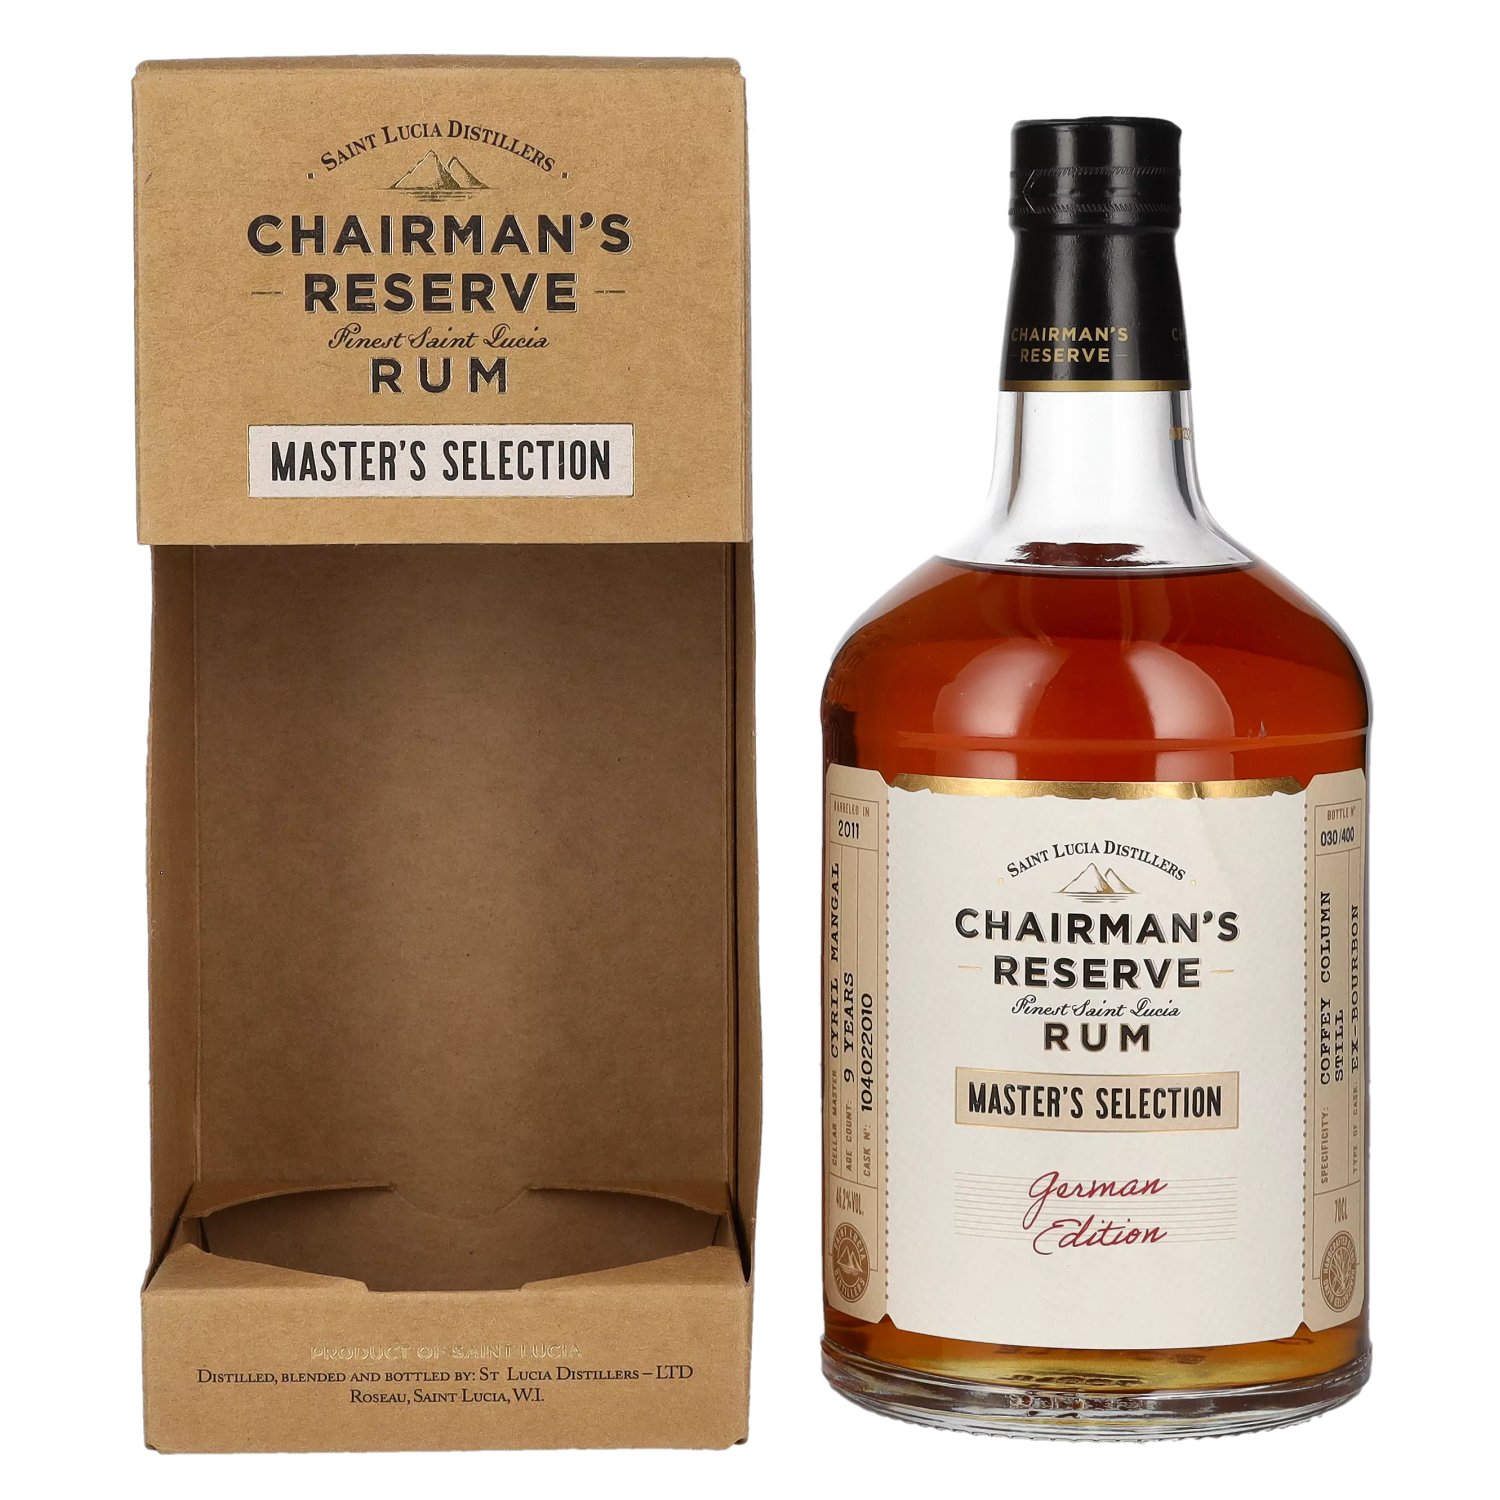 Chairman's Reserve MASTER'S SELECTION German Edition 46,2% Vol. 0,7l in  Giftbox